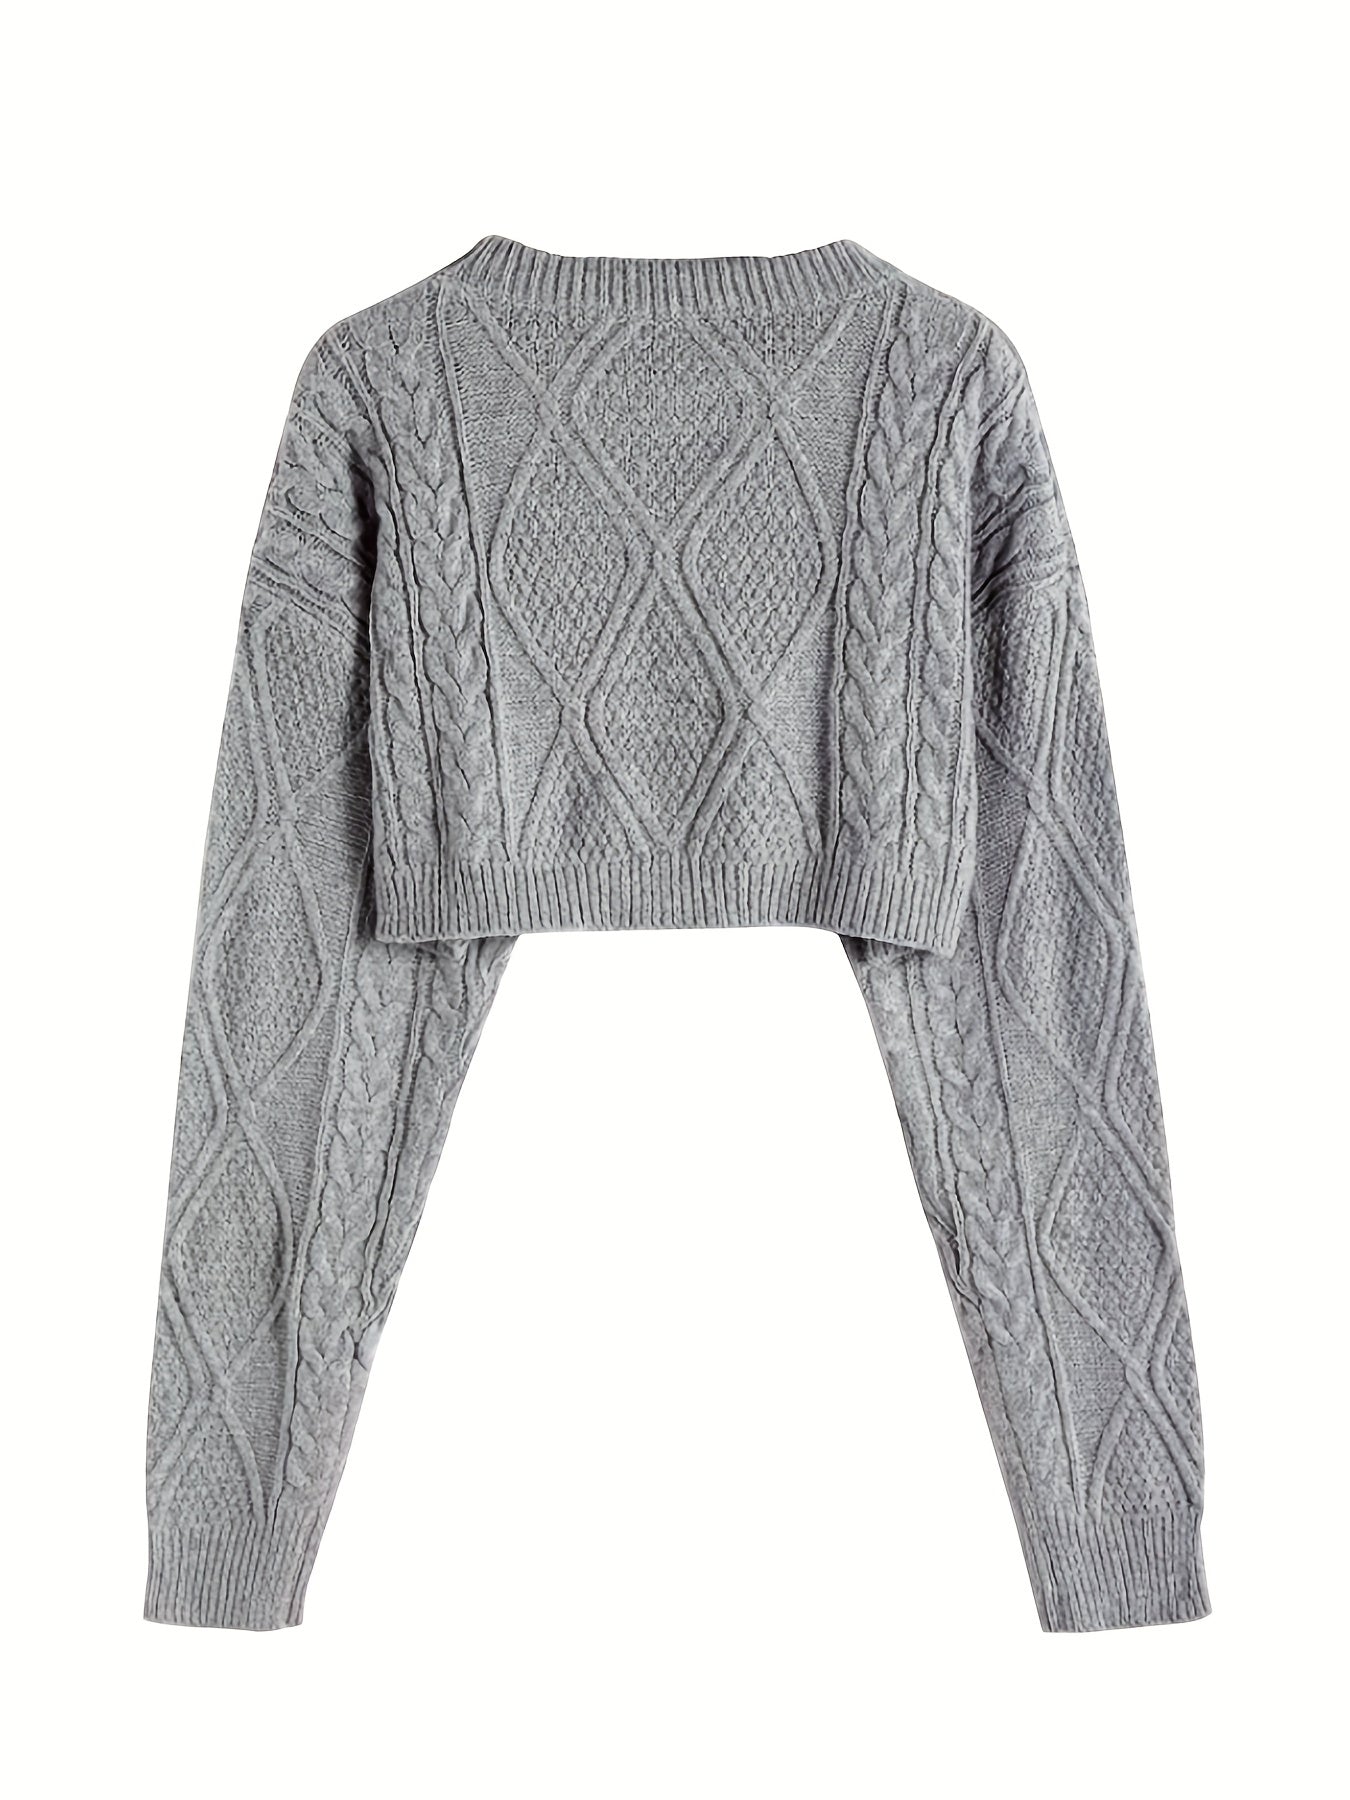 Twist Pattern Crew Neck Sweater, Casual Long Sleeve Crop Sweater For Spring & Fall, Women's Clothing